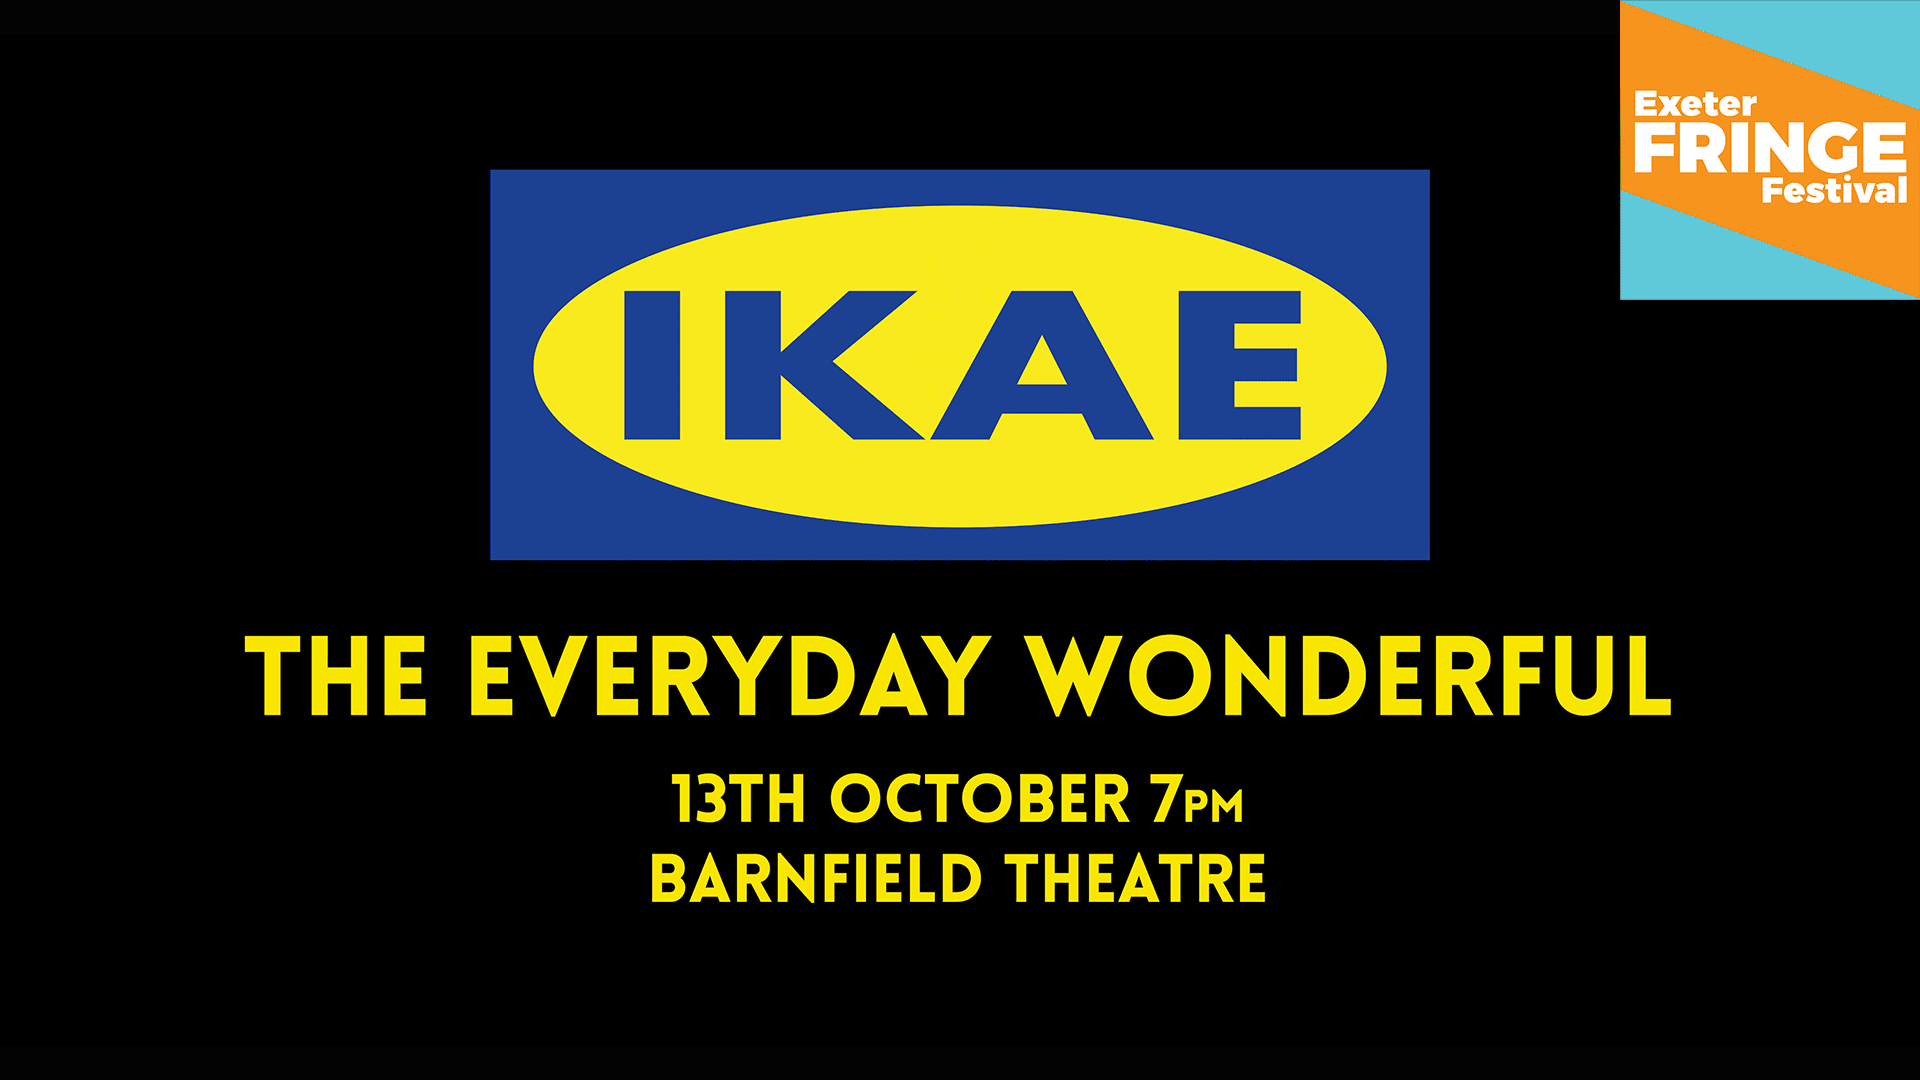 Promotional image for IKAE (styled as the IKEA logo) - Text: The Everyday Wonderful, 13 October 7pm, Barnfield Theatre